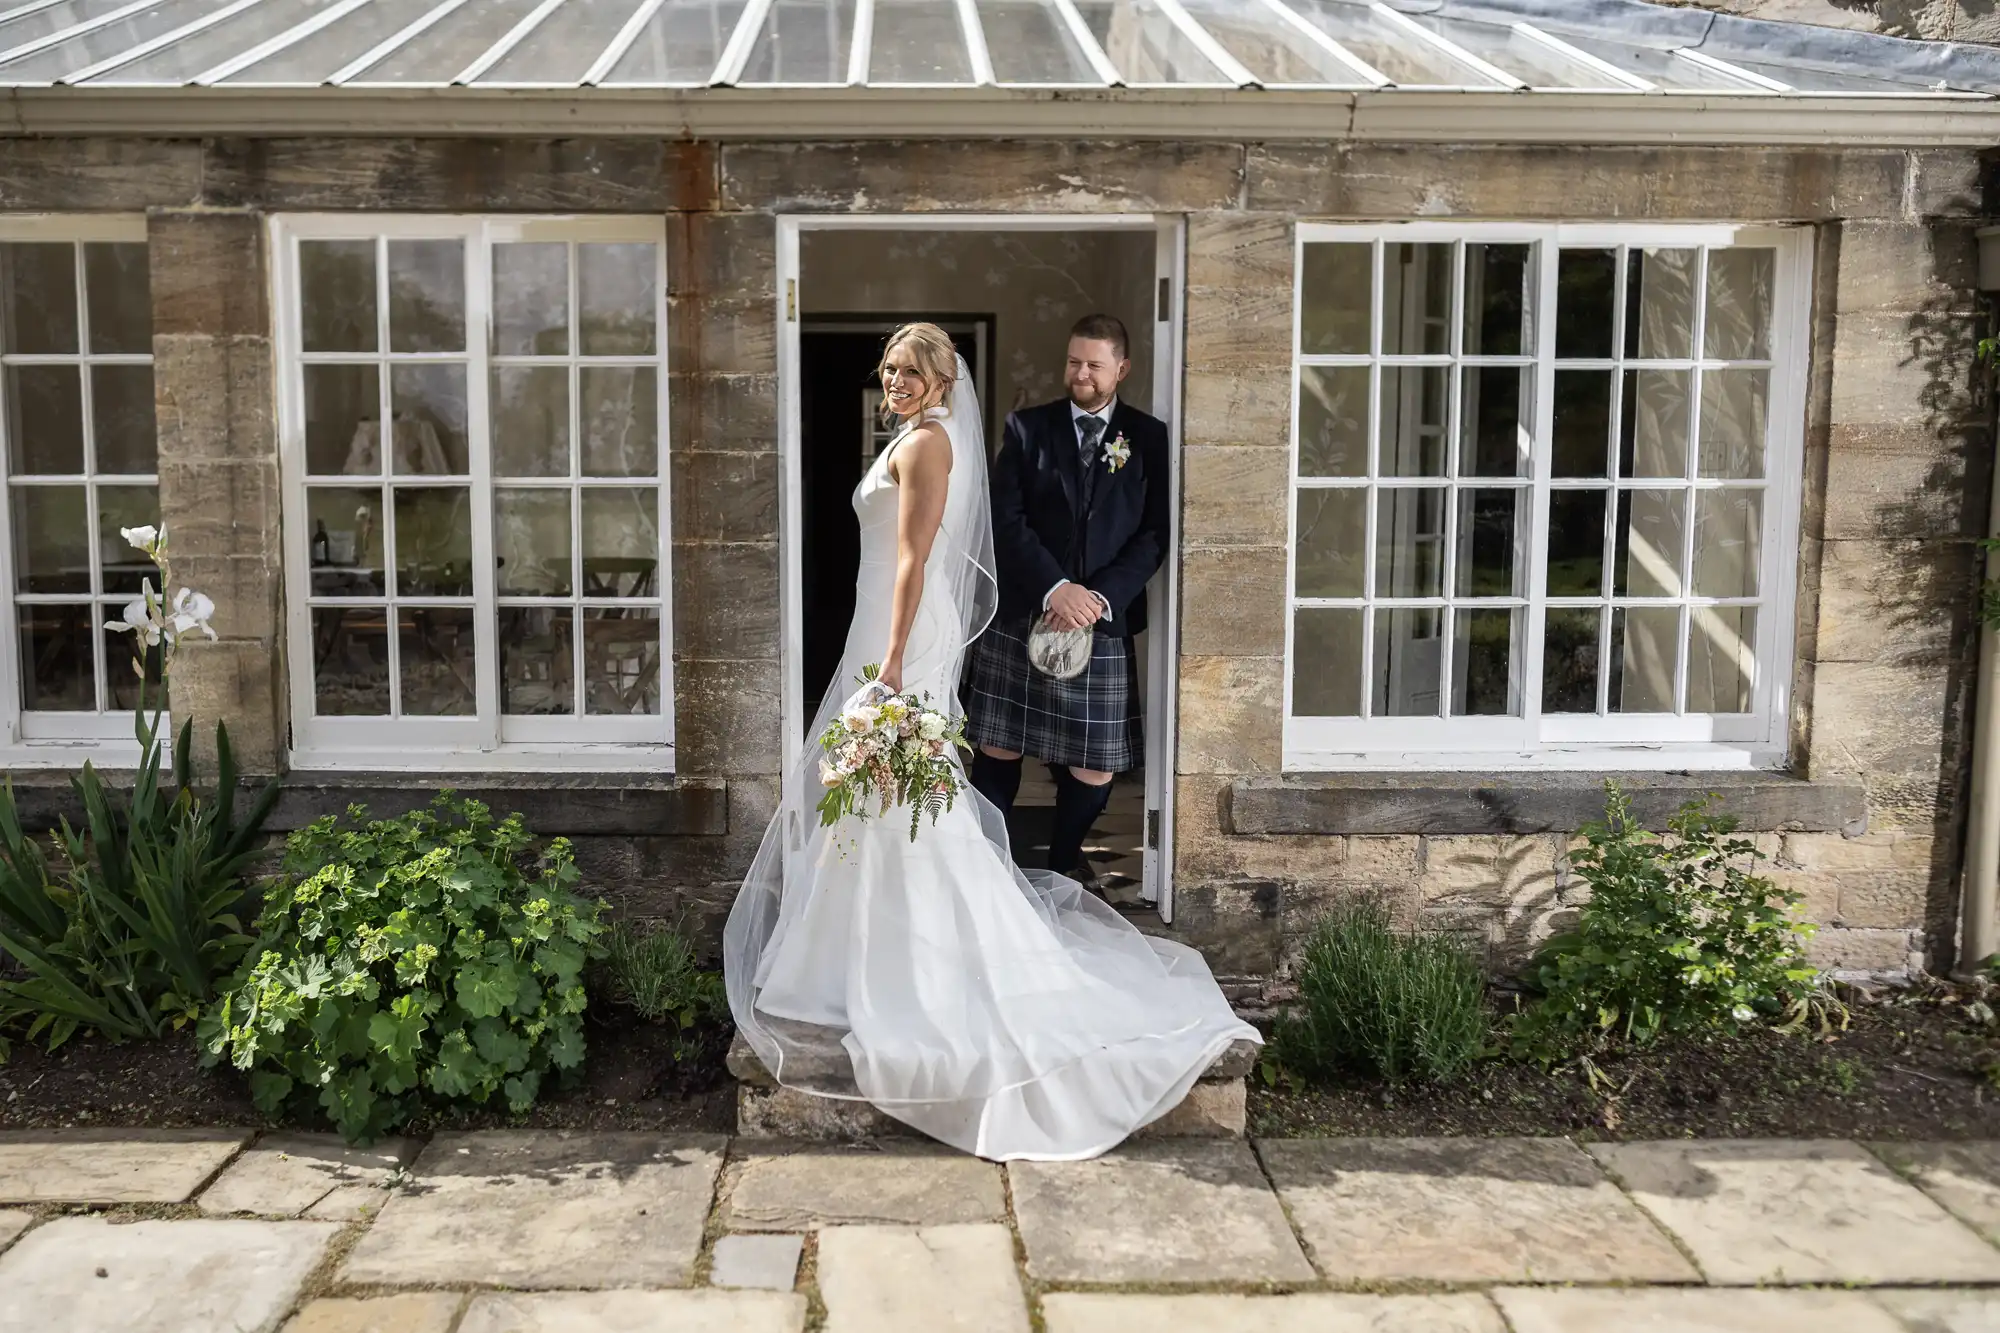 Bride in white dress holding a bouquet and groom in kilt standing by an open door of a stone building with large windows.